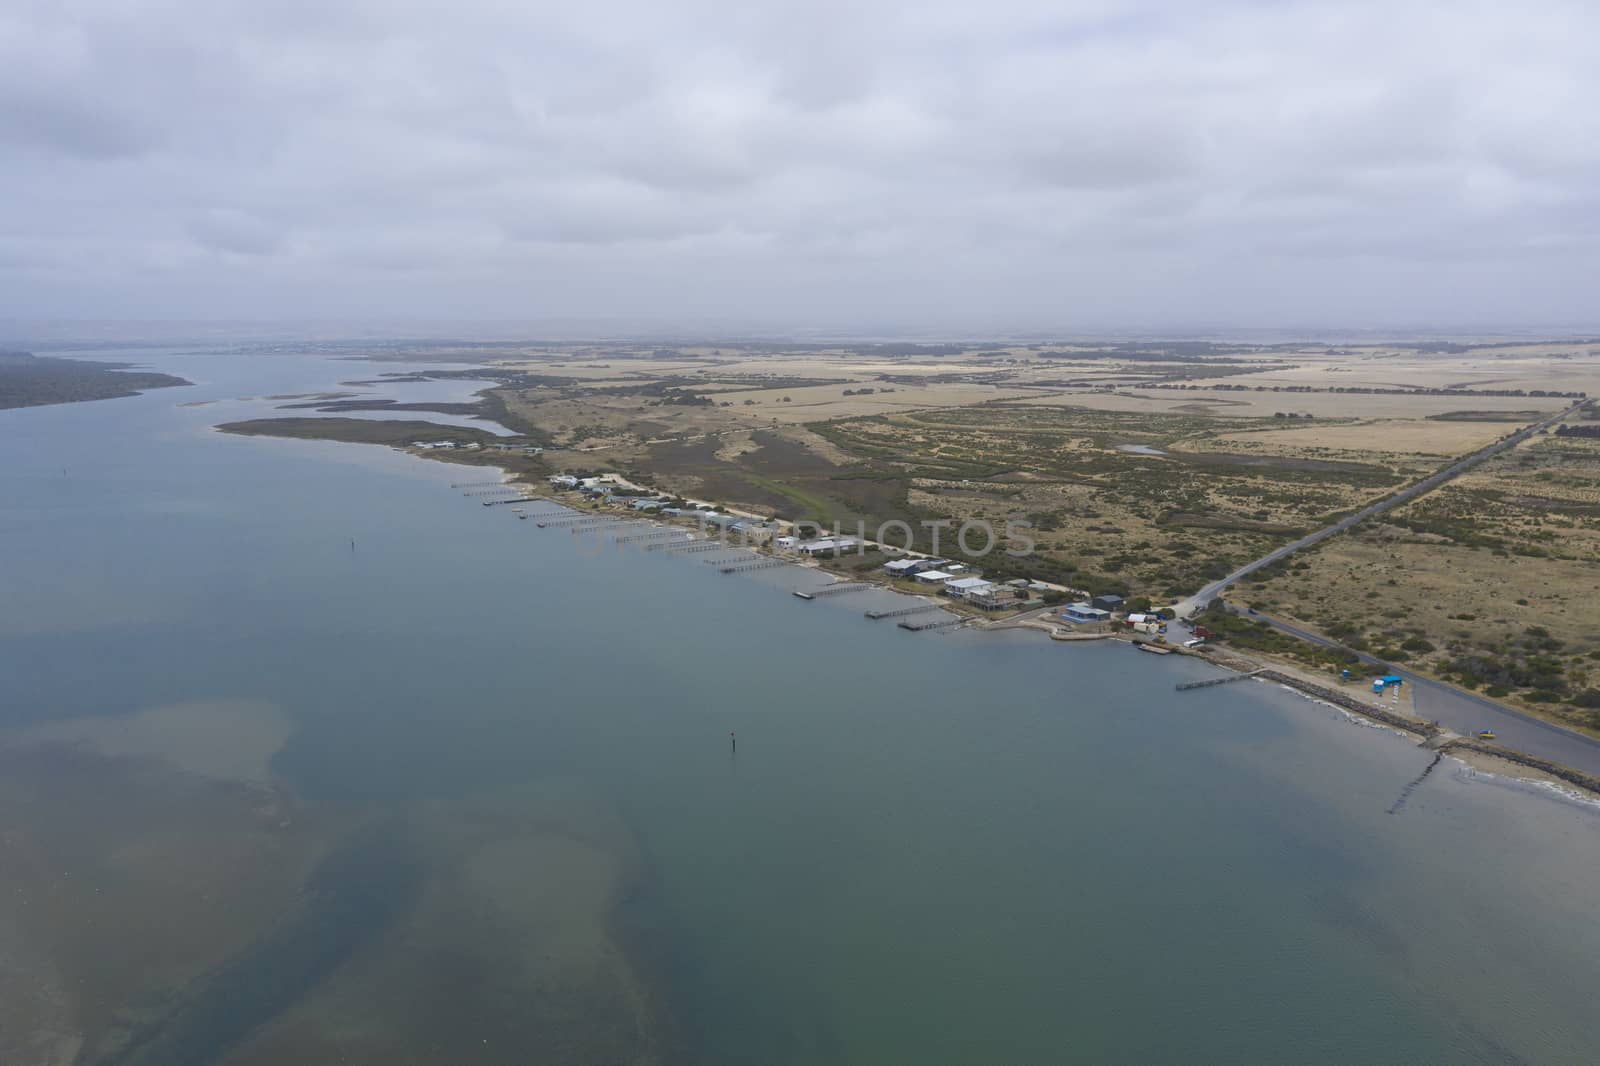 Aerial view of the mouth of the River Murray in regional South Australia in Australia by WittkePhotos